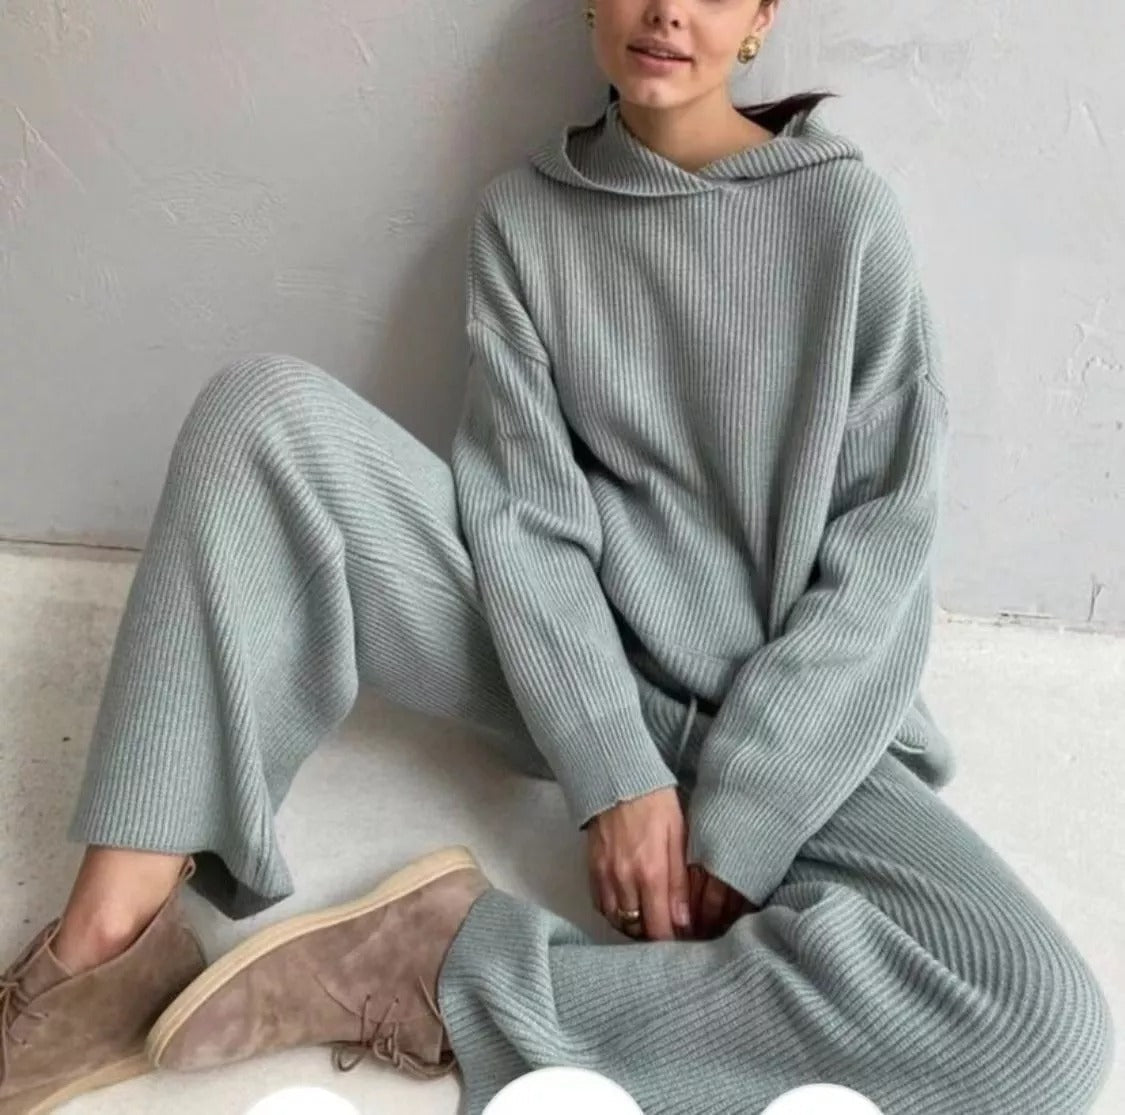 HOODED TOP & WIDE LEG FLARED PANTS SUIT